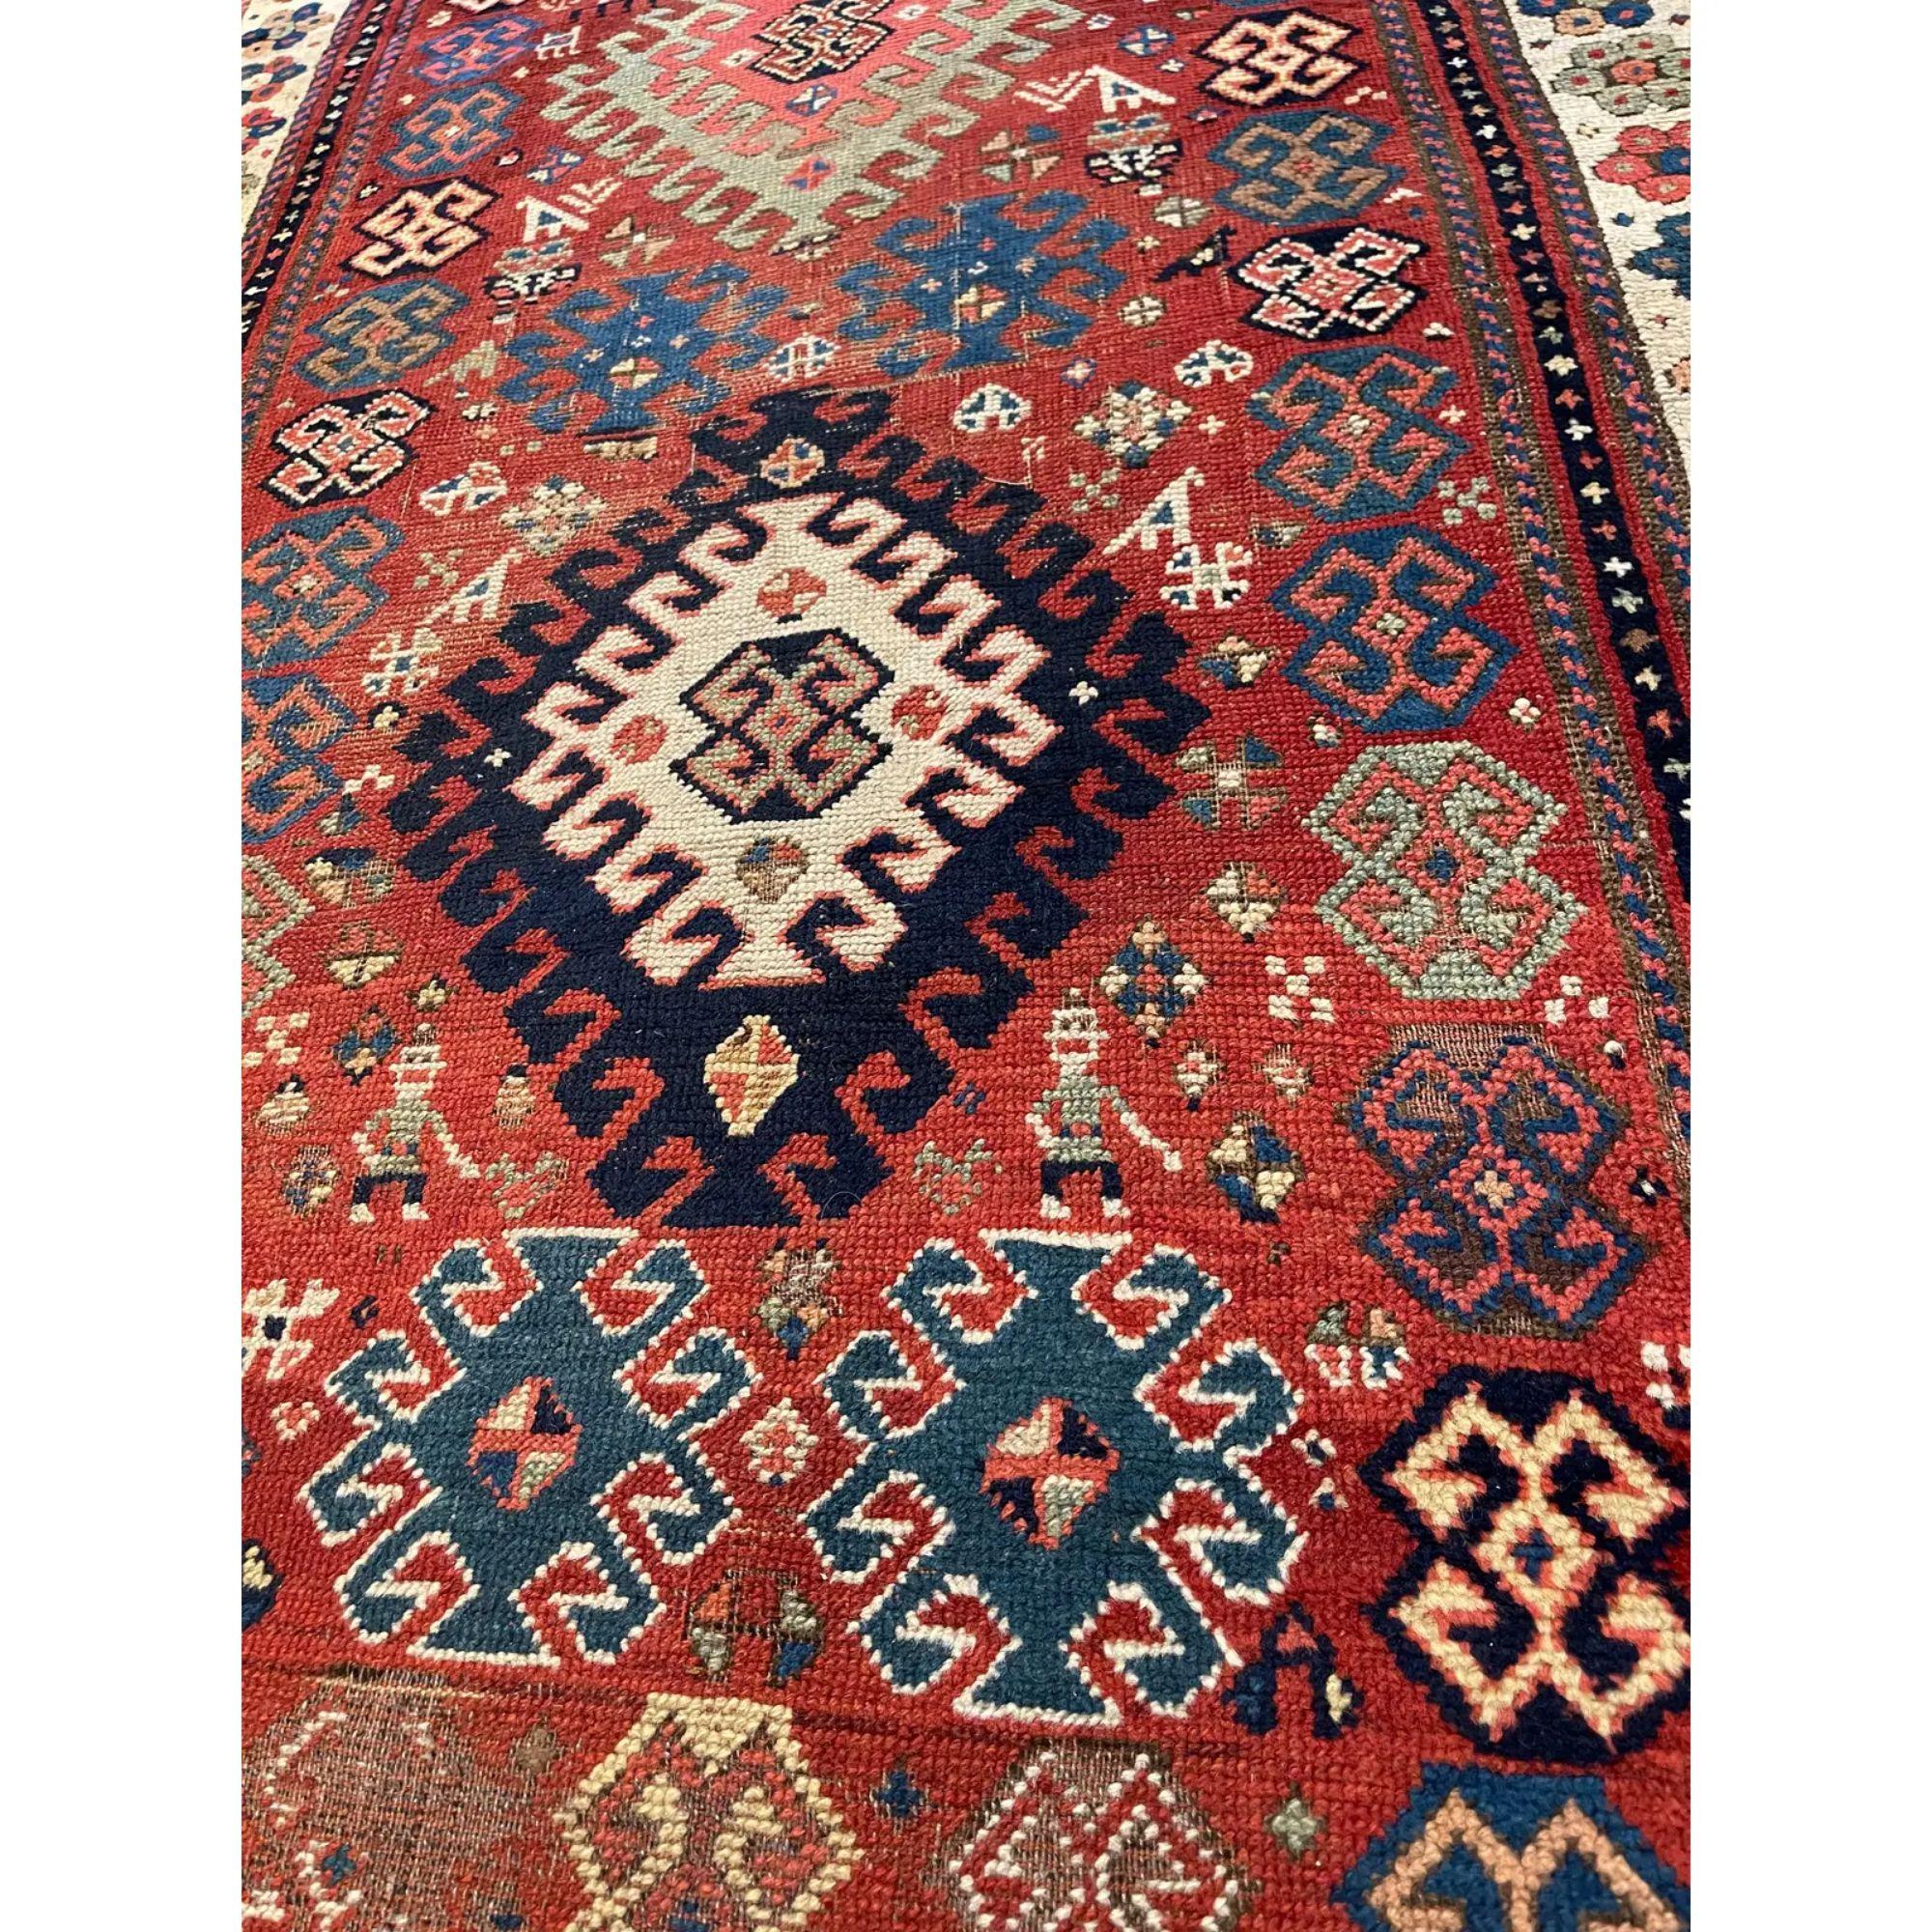 Ca.1900 Antique Caucasian Rug 10'8'' X 3'6'', handmade and hand-knotted.

The antique Caucasian rugs get their name from the area in which they were made – the Caucasus. The Caucasus is a region that produces distinctive rugs since the end of the